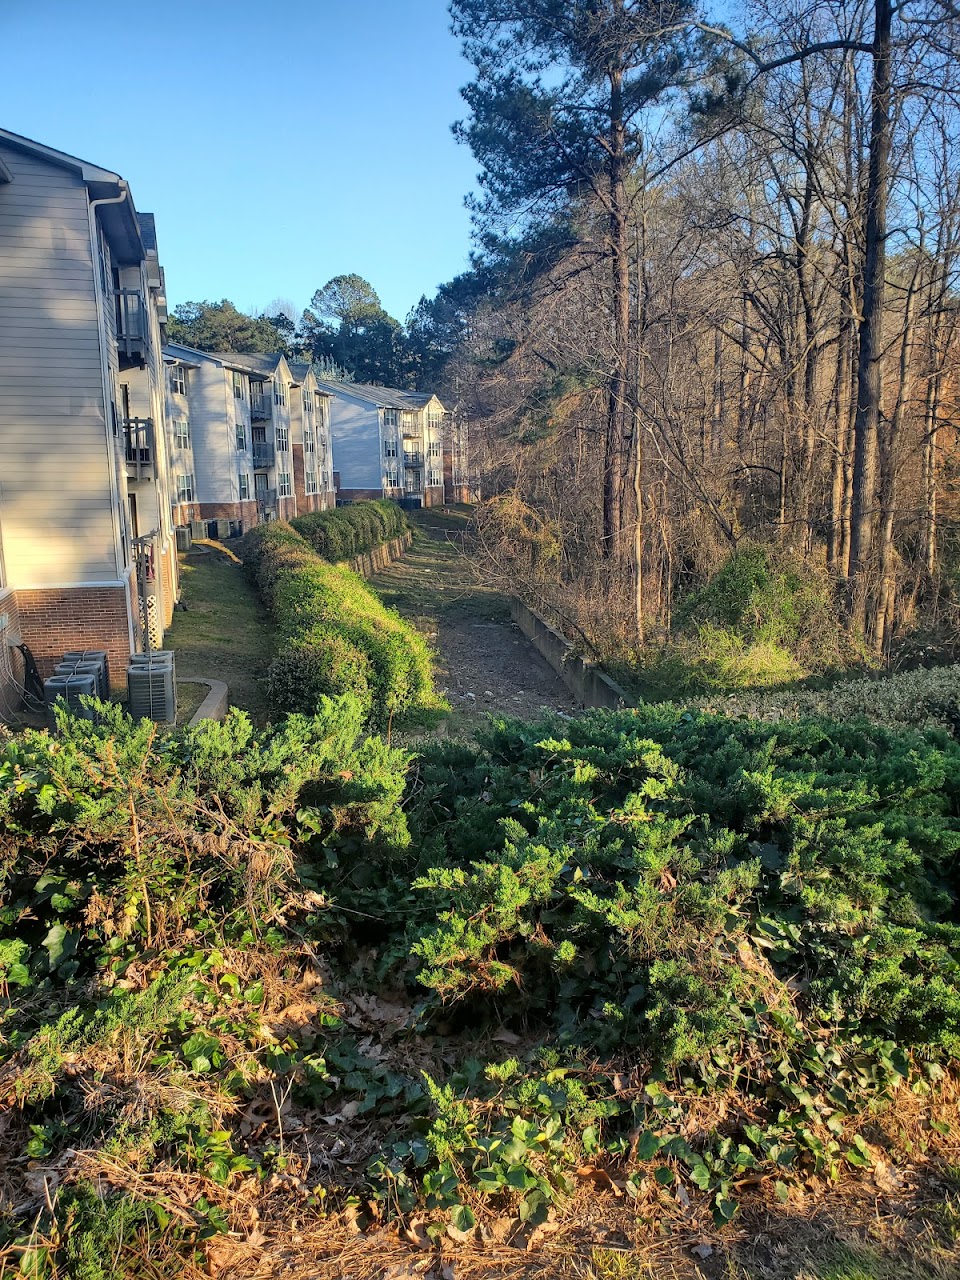 Photo of TANGLEWOOD PARK APARTMENTS at 5355 SUGARLOAF PKWY LAWRENCEVILLE, GA 30043